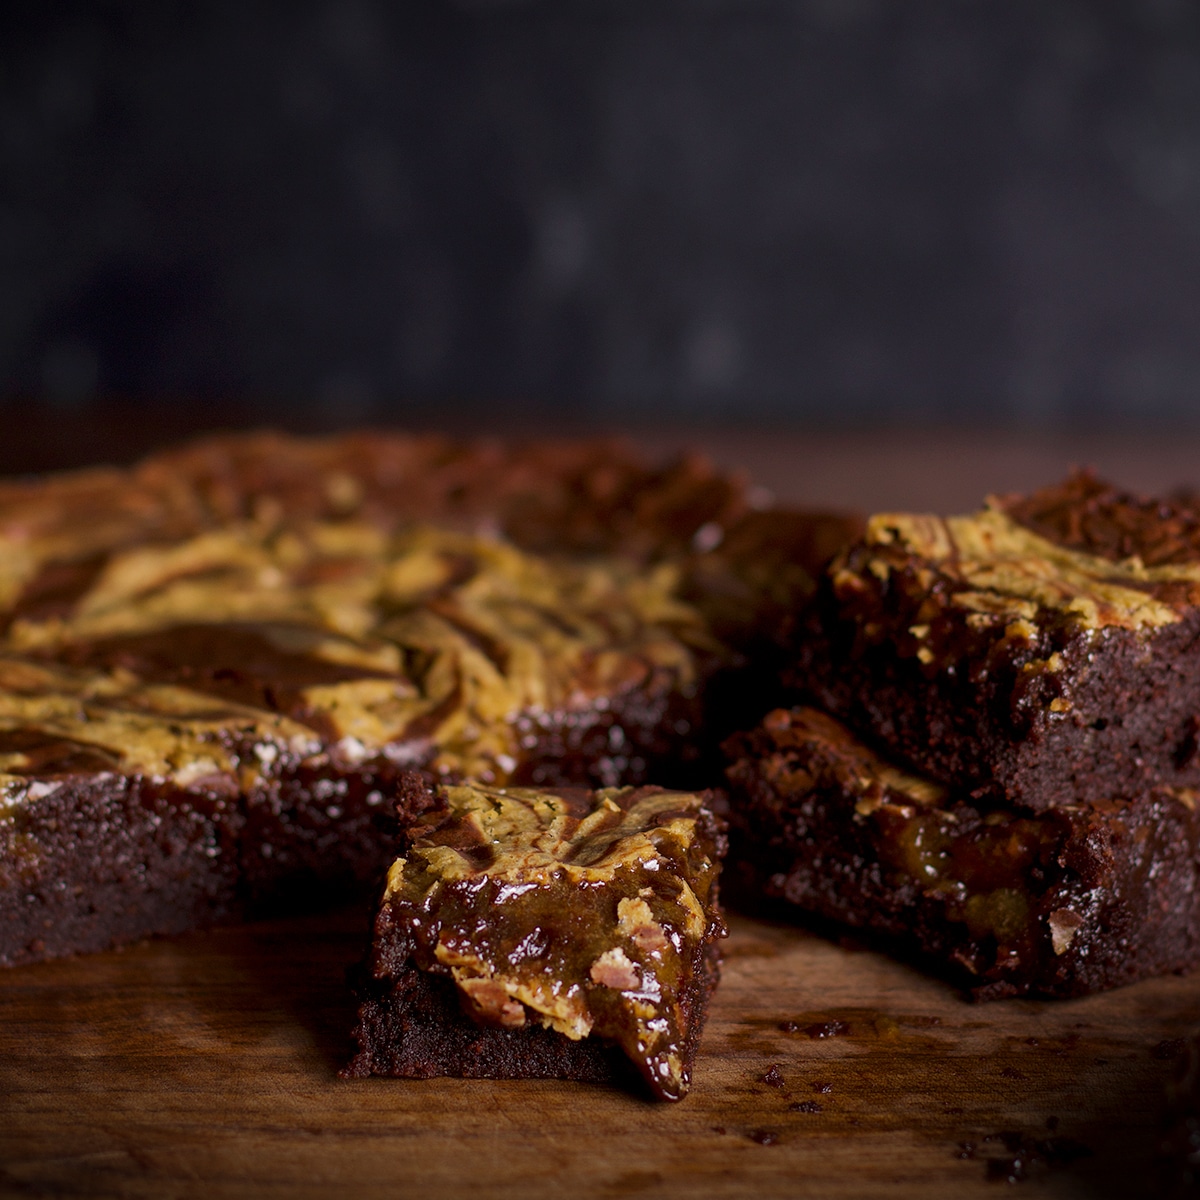 A close up photo of freshly baked tahini brownies so you can see their fudgy texture.